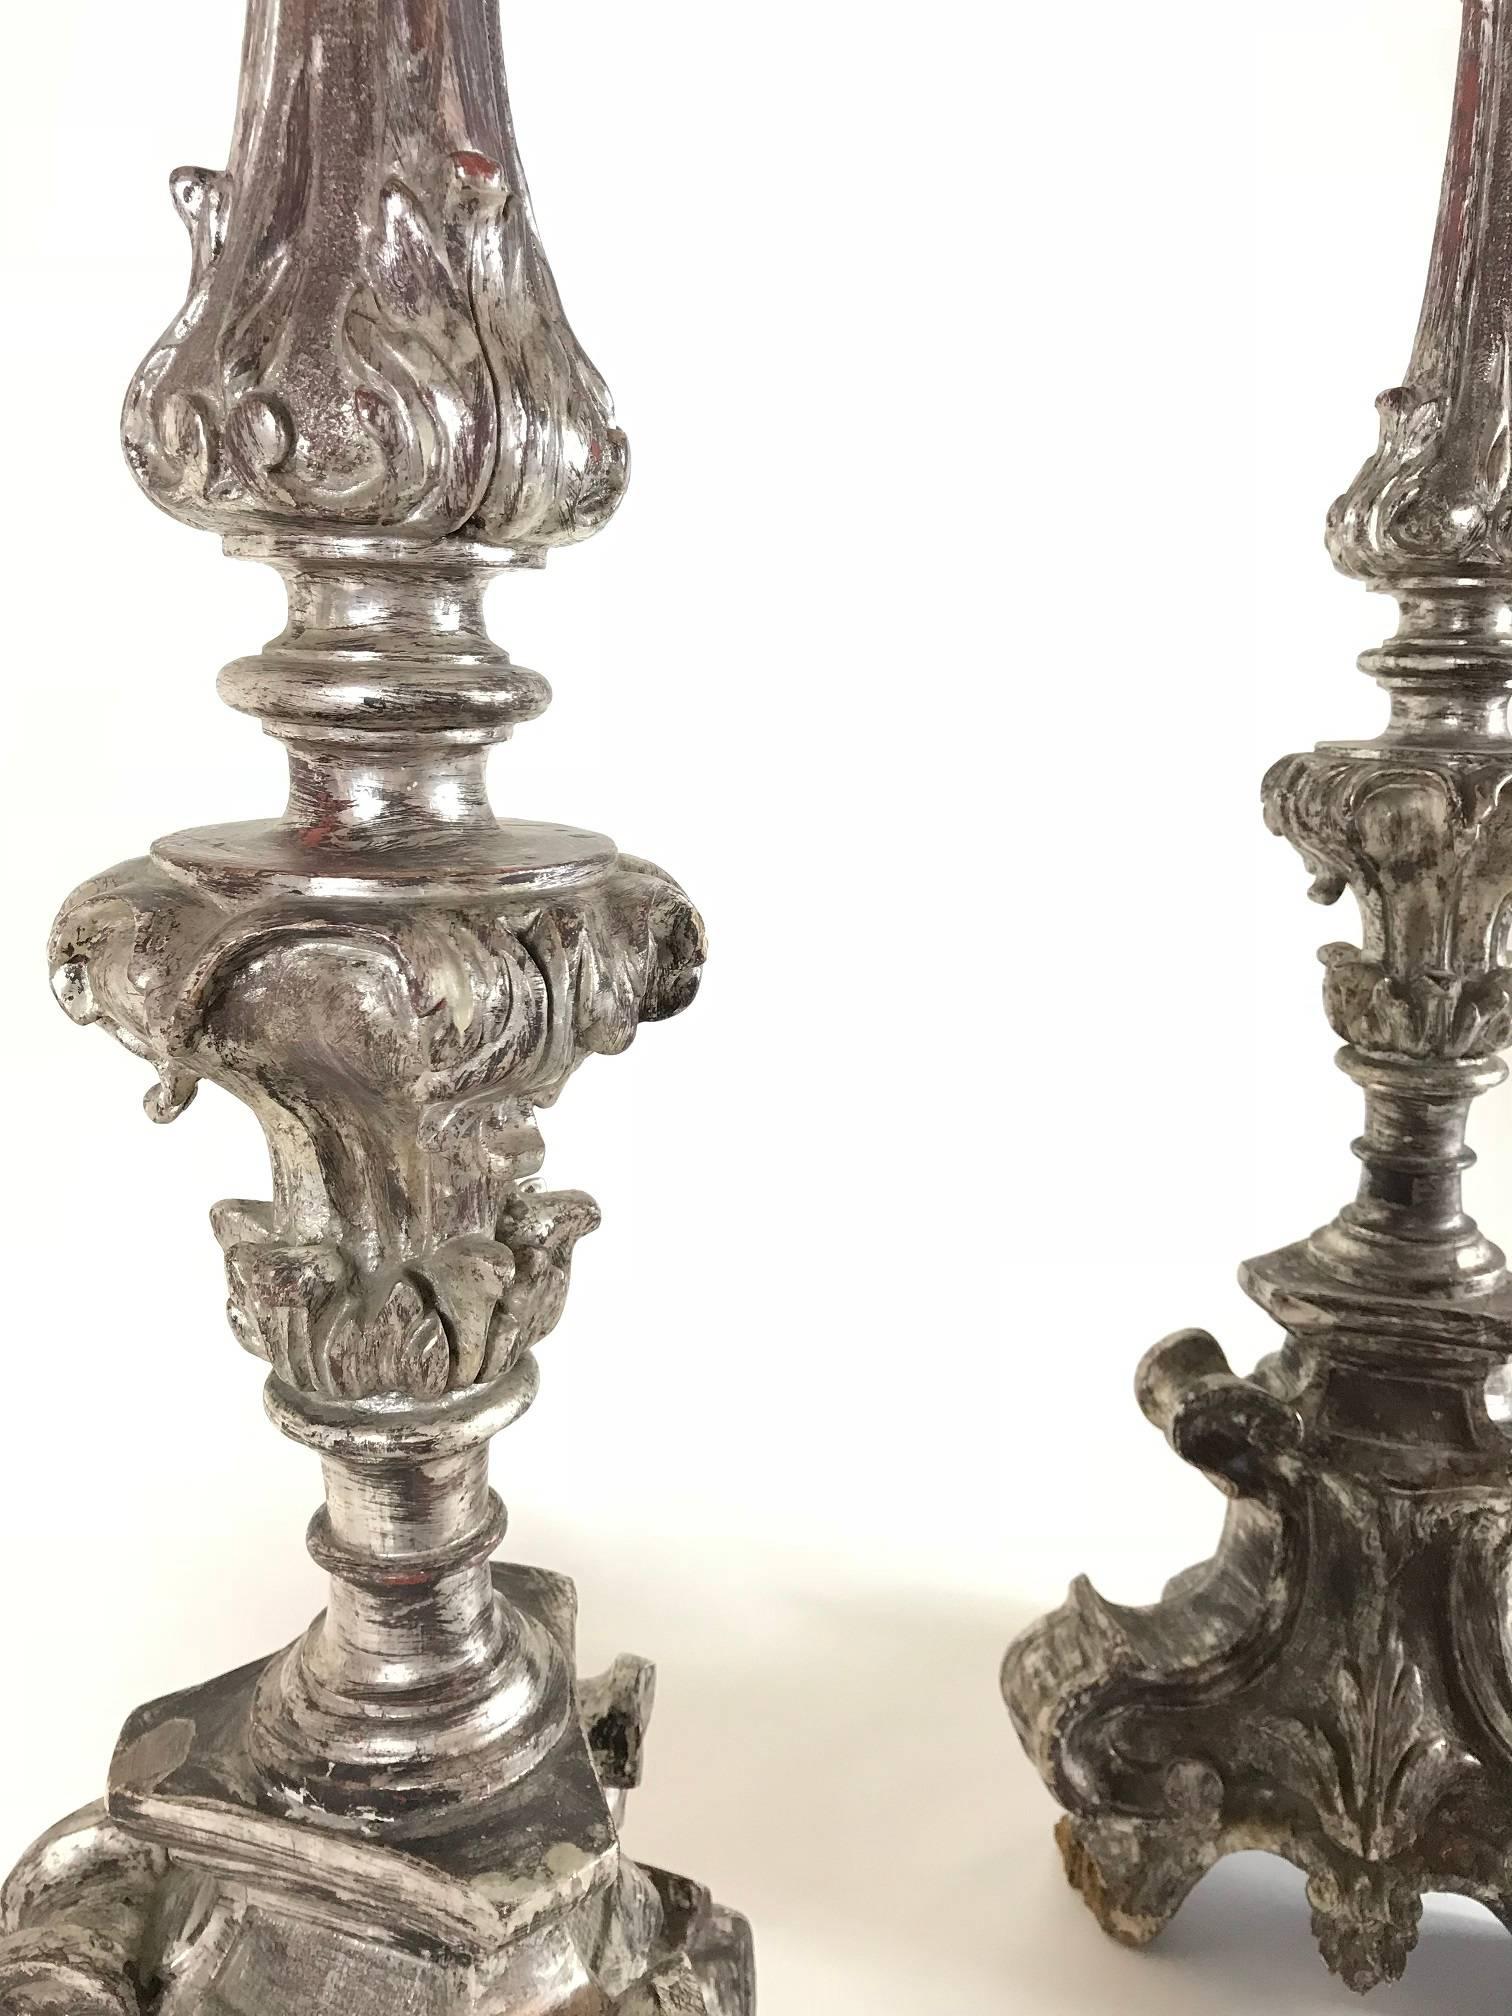 Pair of finest hand-carved Italian silver gilt candlesticks from late 17th century. 
These rare altar prickets are handmade in the Italian Baroque era -  they feature elaborate palmettes, shields, acanthus leaves and a tripod base with scrolled